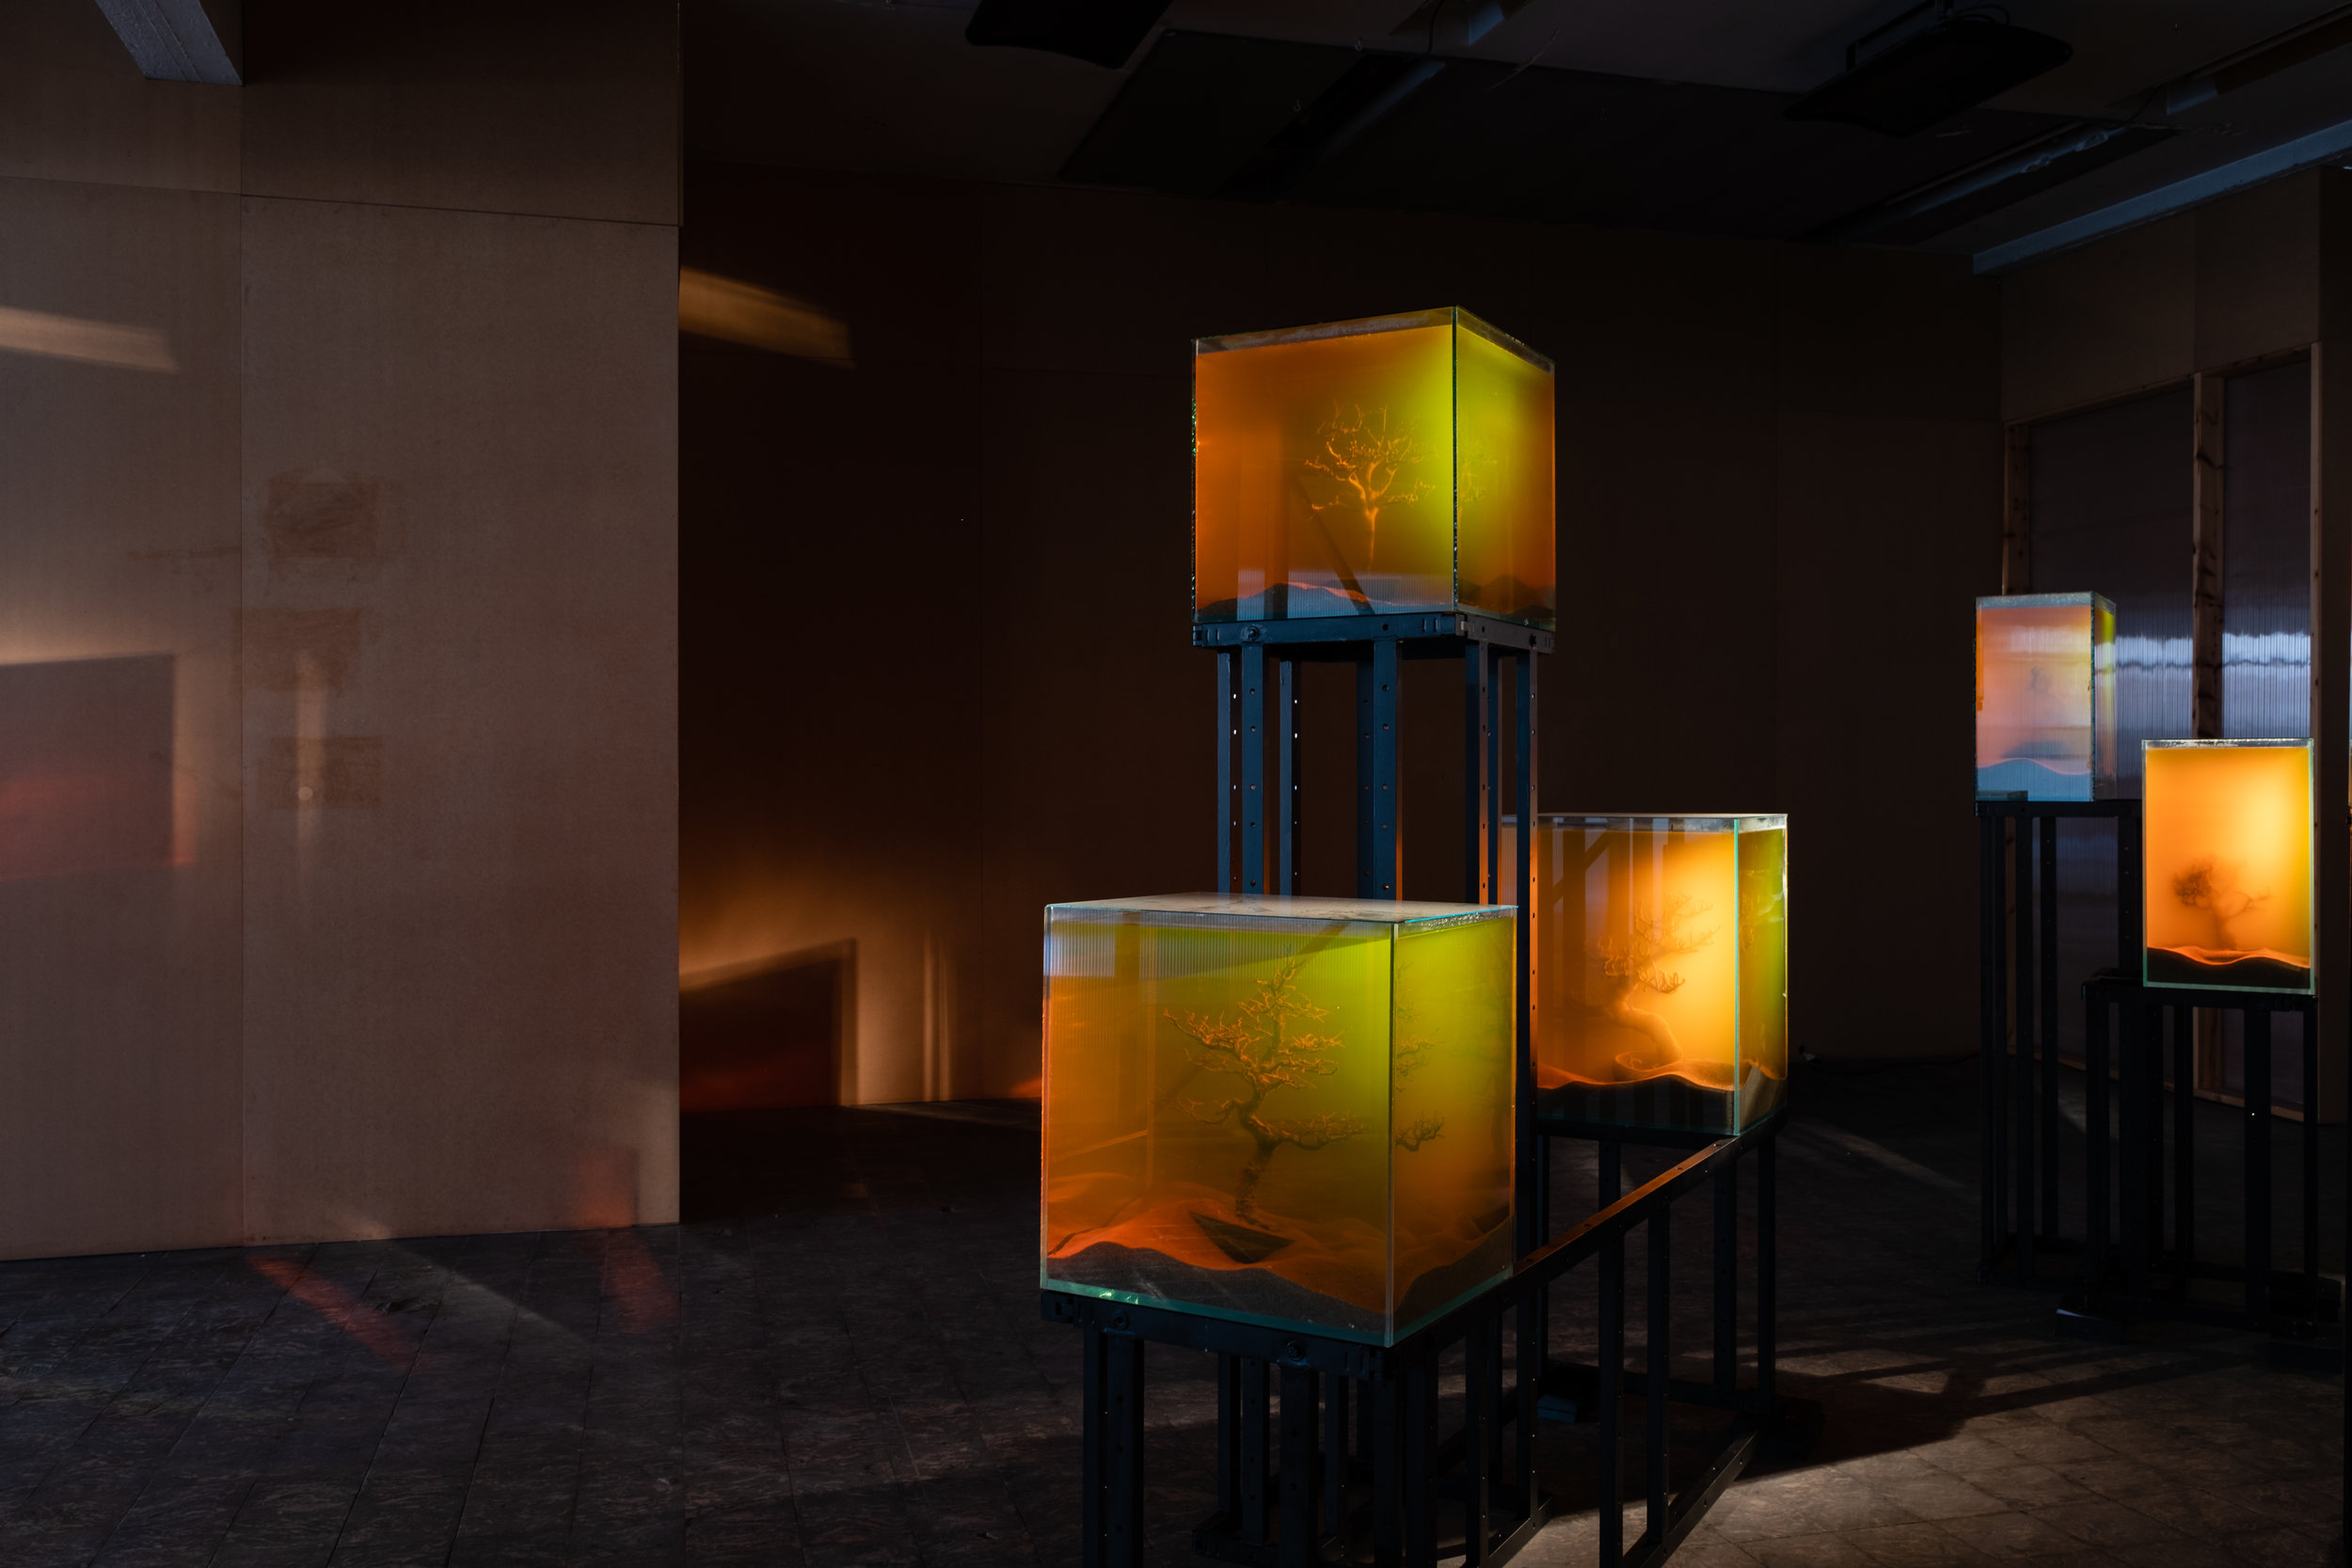 Various Artists, ‘toxiThropea.sunset’ (2019), in ‘Deadly Affairs’ (23.03-30.06.2019), Kunsthal Extra City, Antwerp, photo by Tomas Uyttendaele_2.jpg